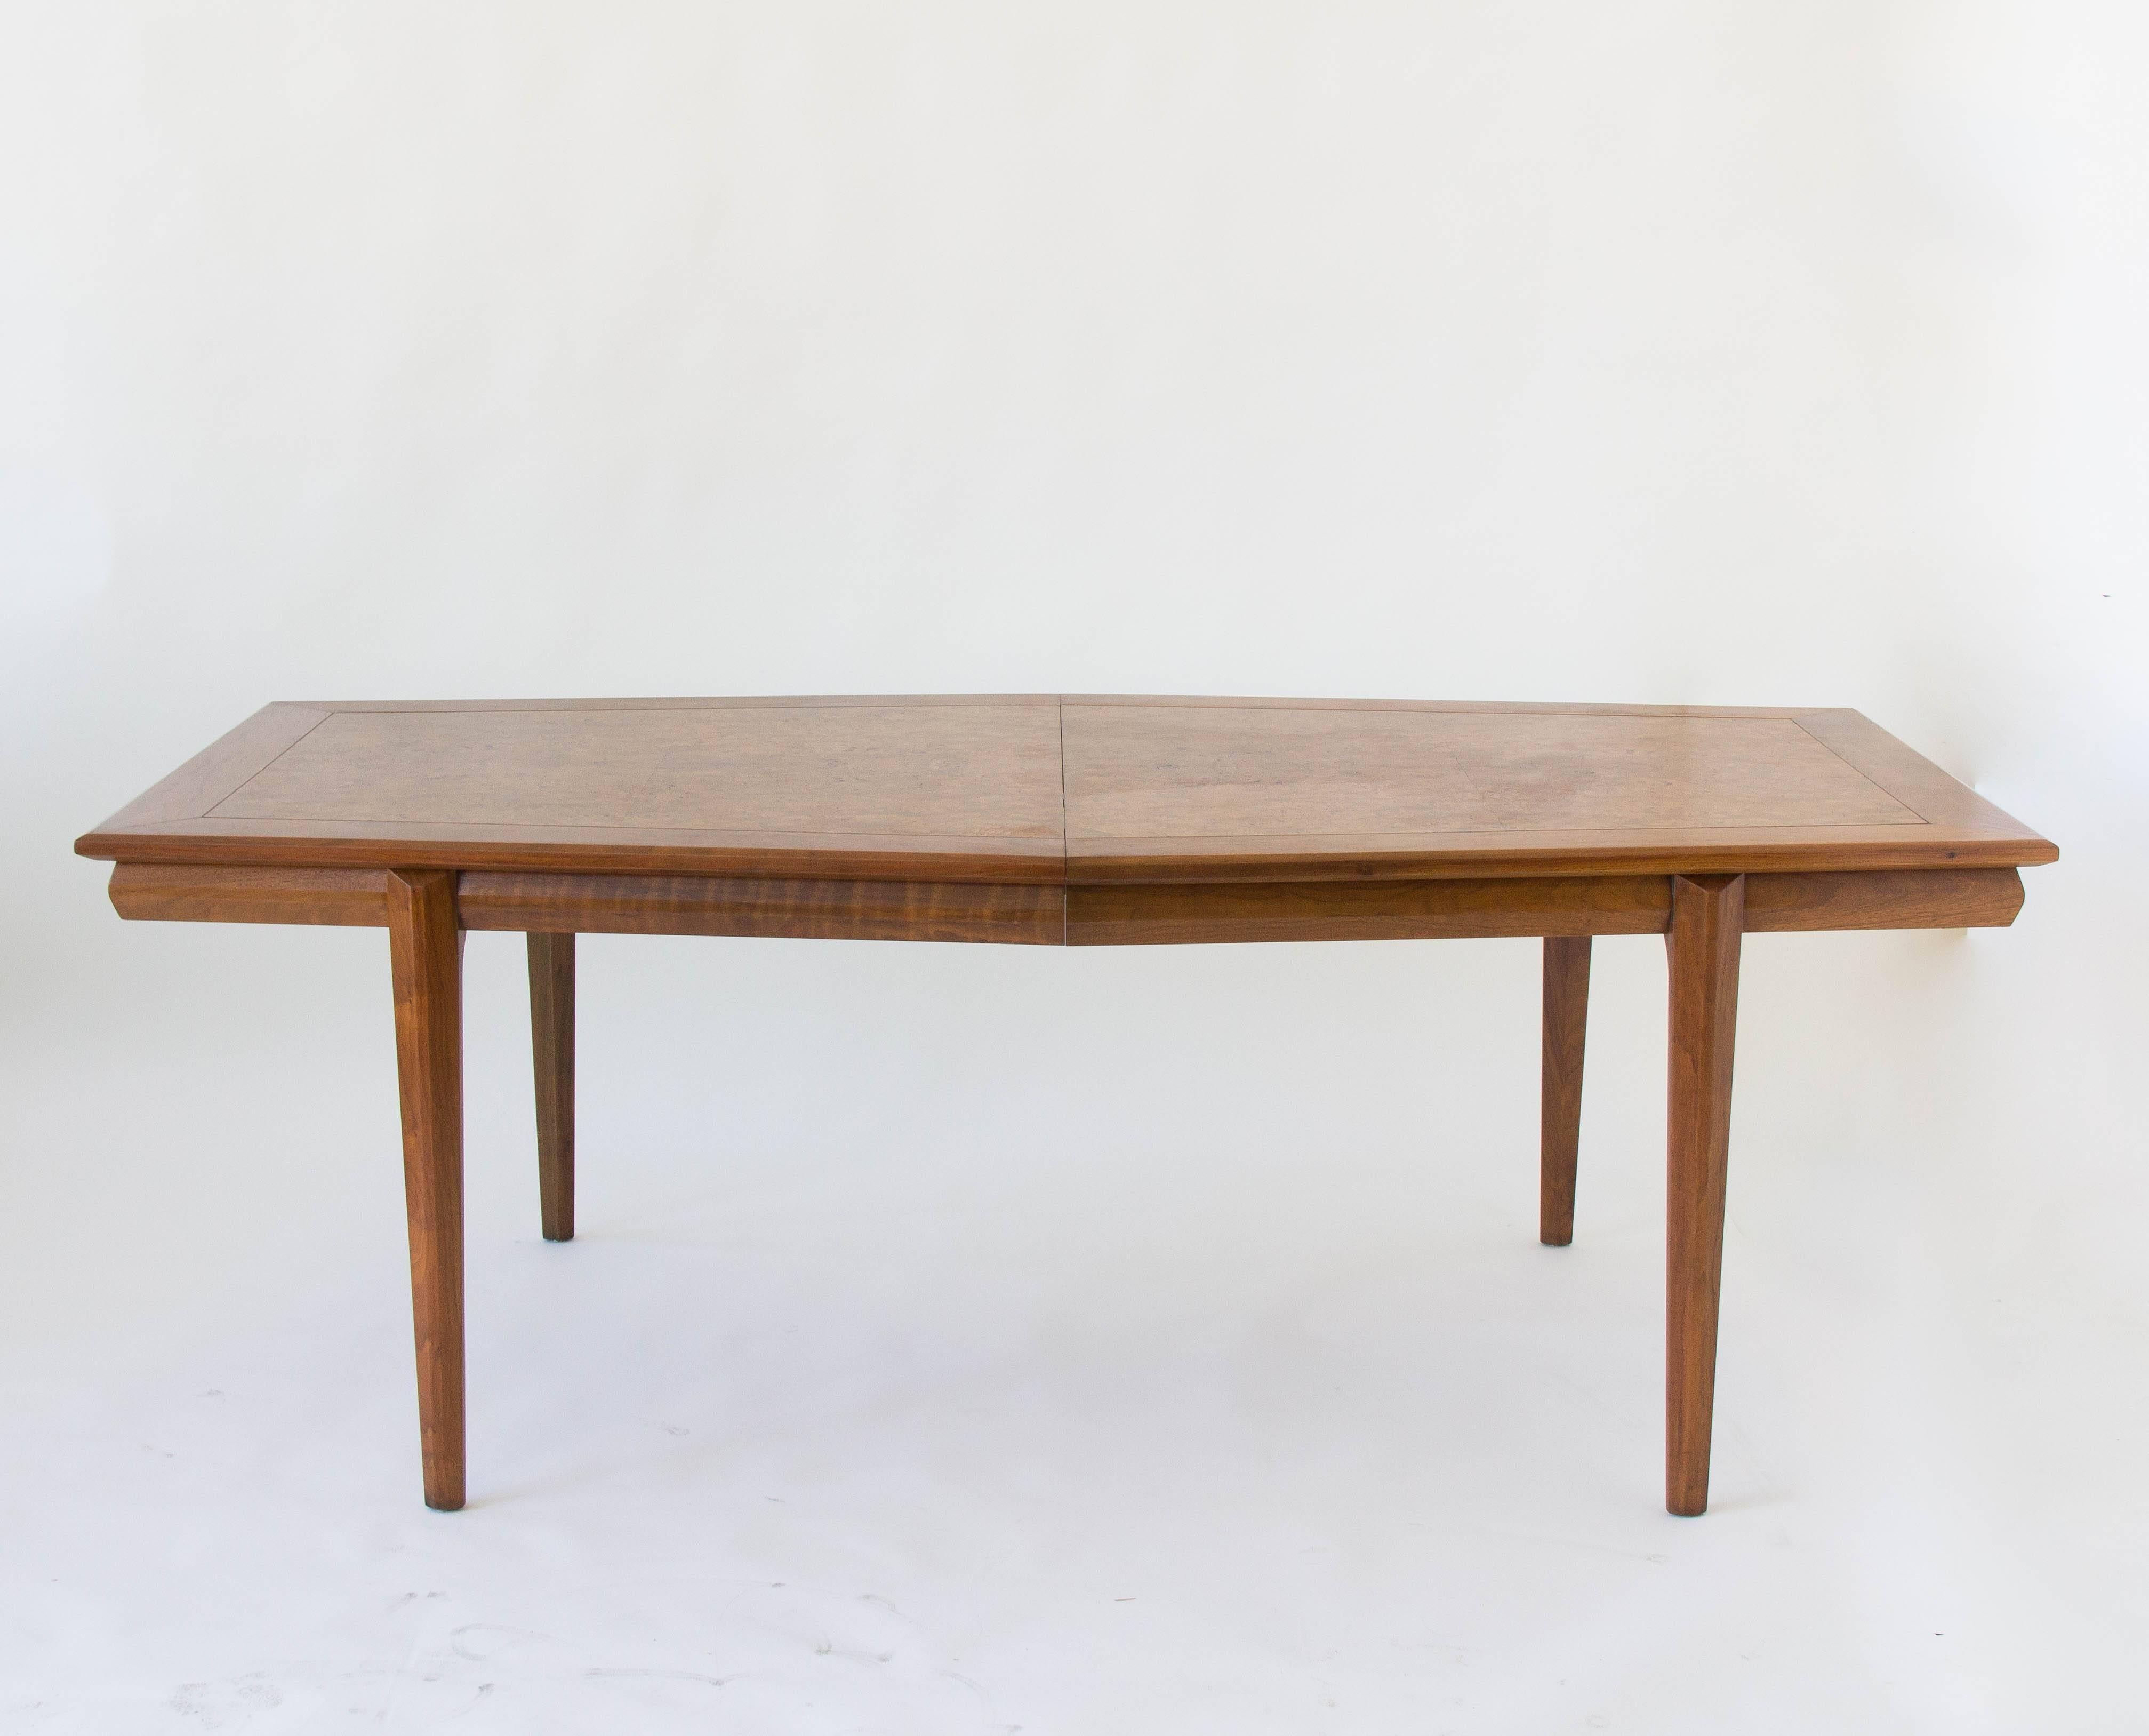 Veneer Cal-Mode Dining or Conference Table with Burlwood Inlay